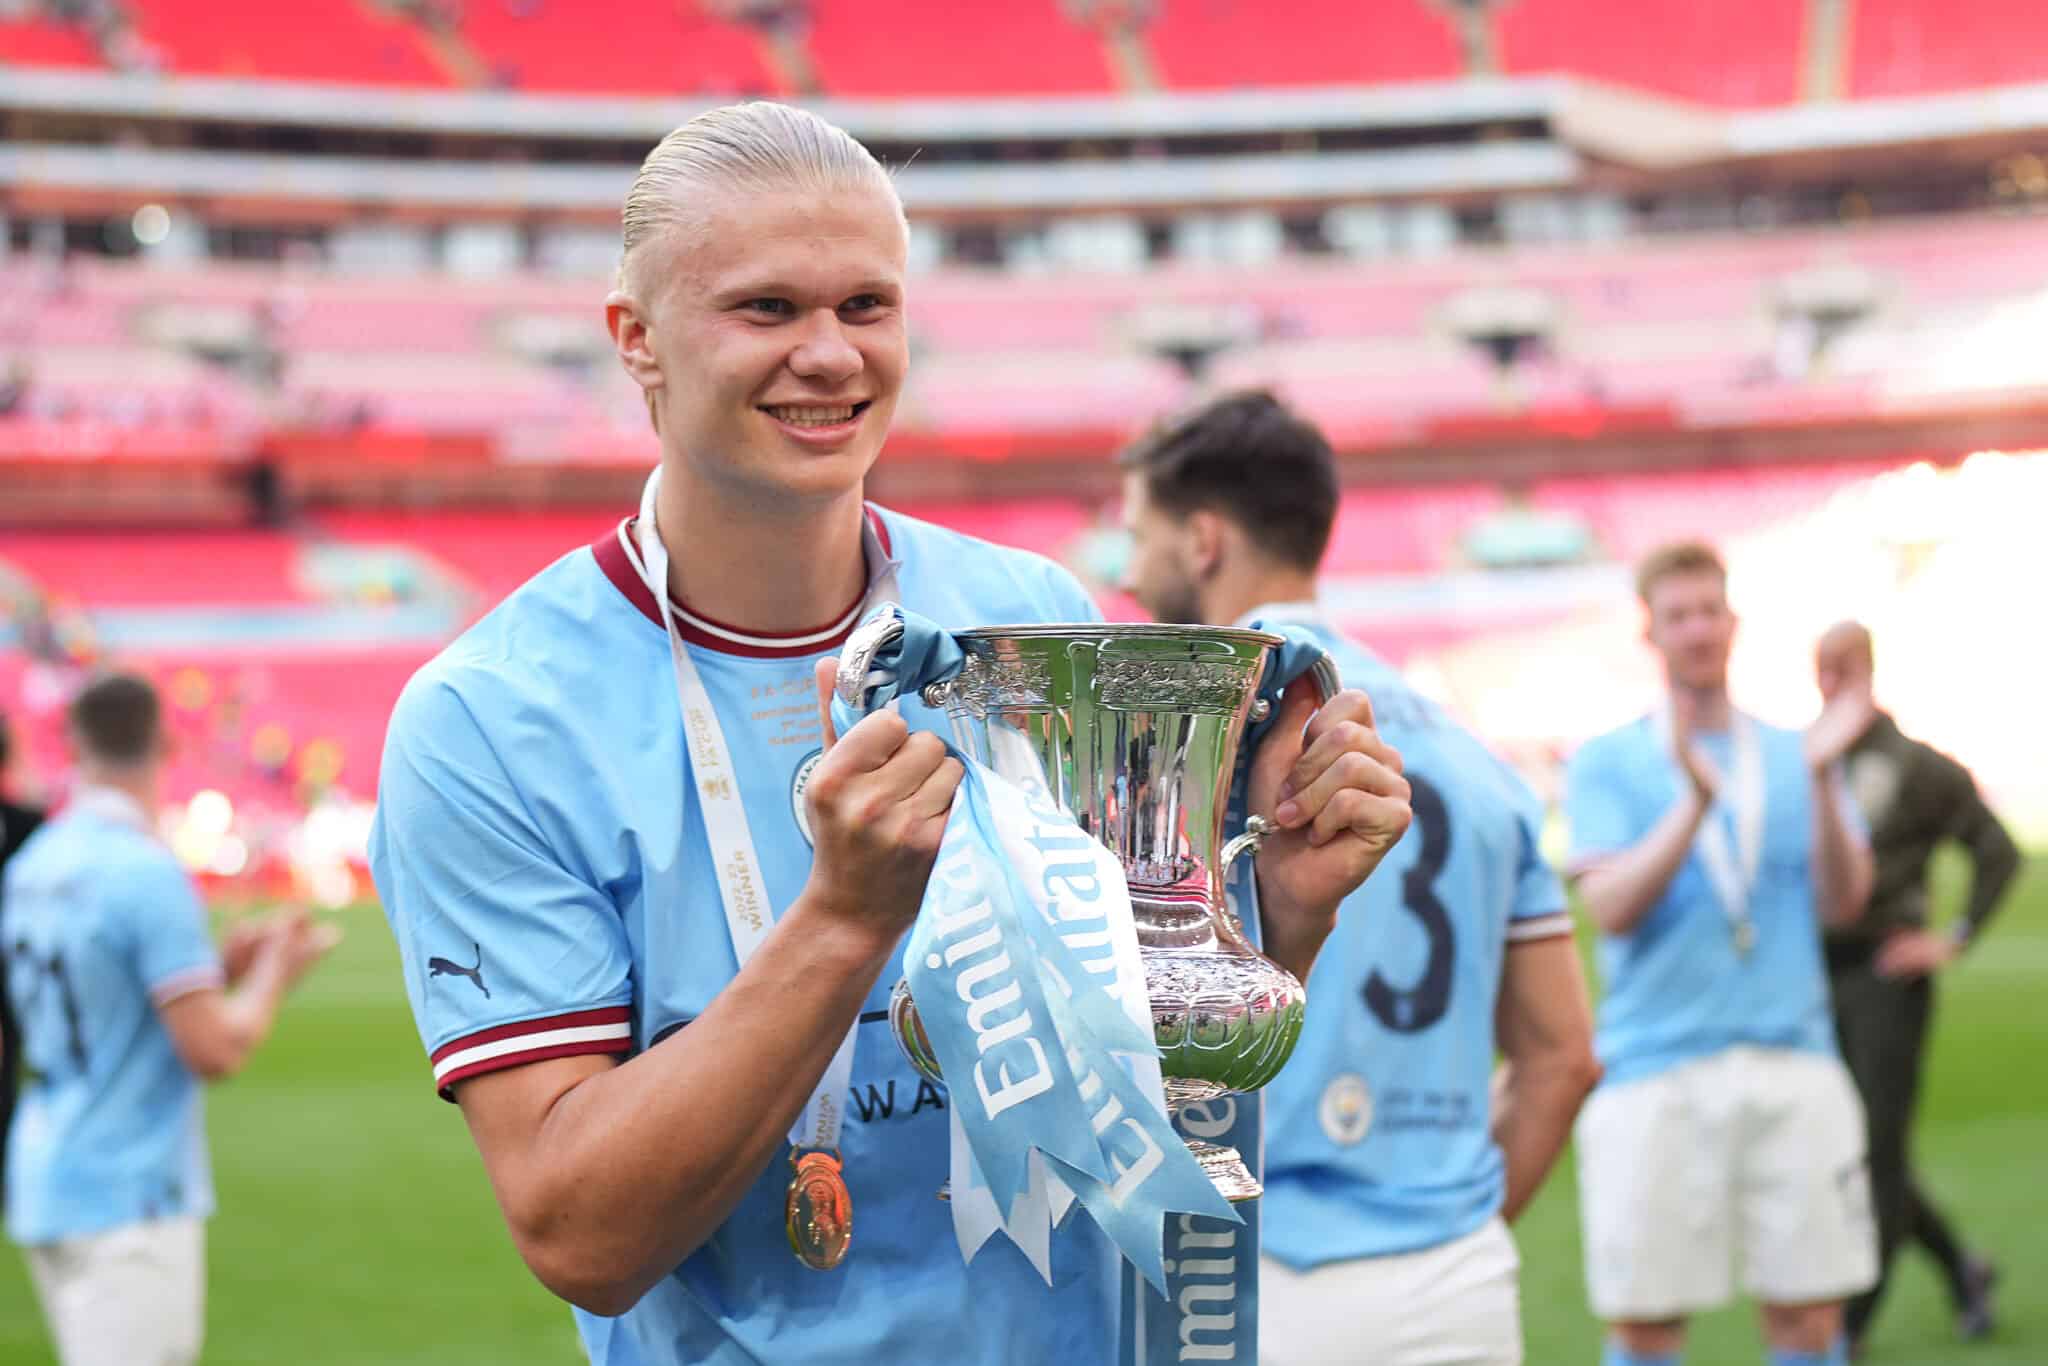 Erling Haaland of Manchester City celebrates with the FA Cup Trophy after the team's victory during the Emirates FA Cup Final between City and Manchester United at Wembley Stadium. if he plays in the FA Cup semi-finals, he'll be looking to strike gold.